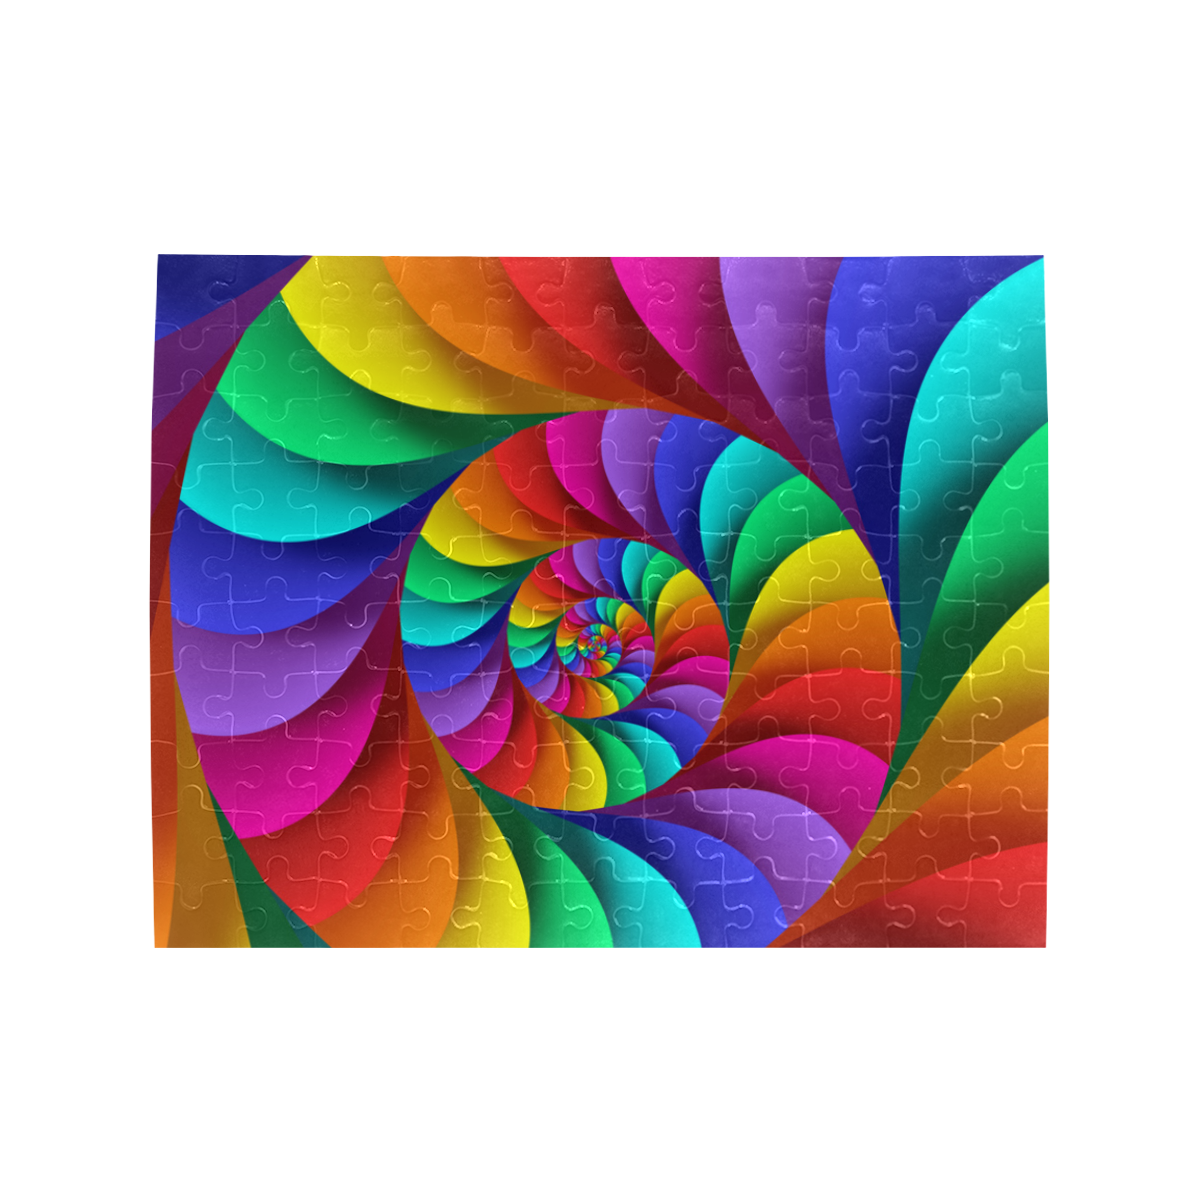 Psychedelic Rainbow Spiral Puzzle Rectangle Jigsaw Puzzle (Set of 110 Pieces)